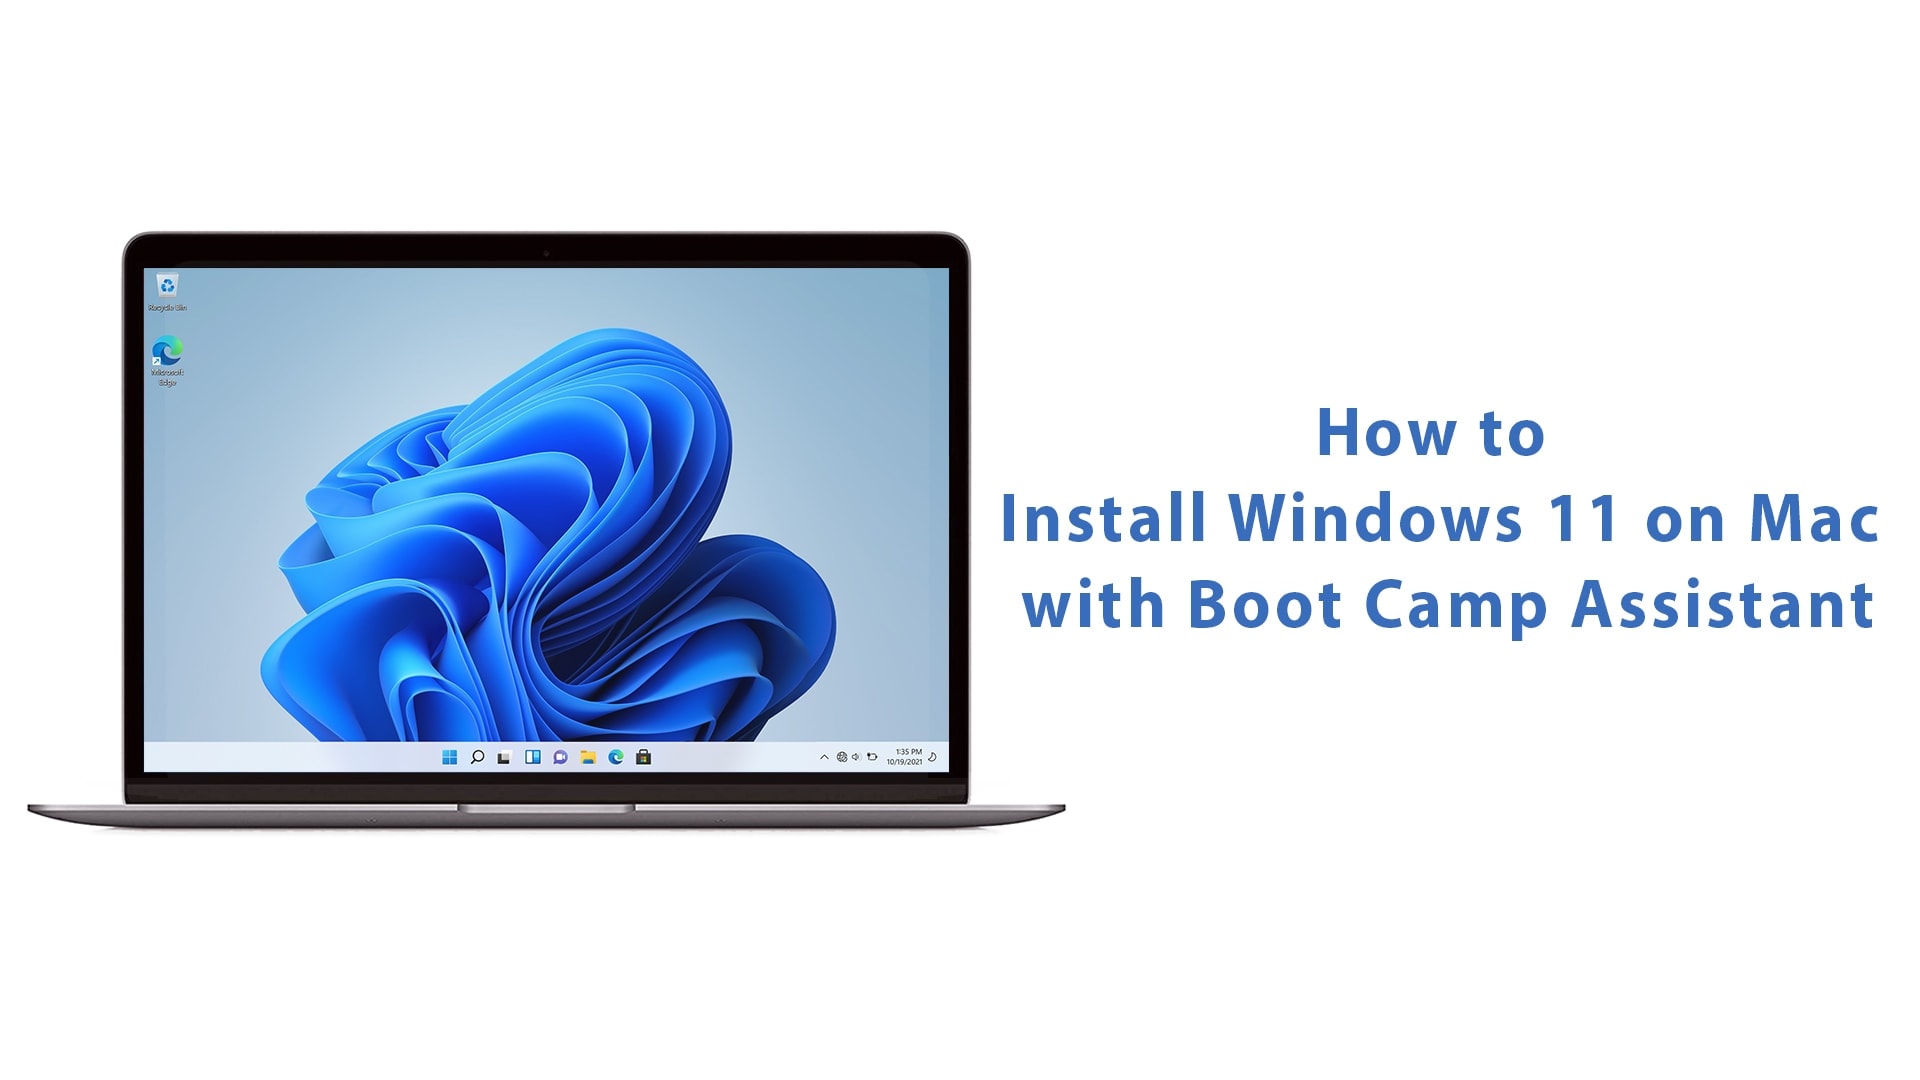 install windows 10 on macbook pro 2010 without bootcamp